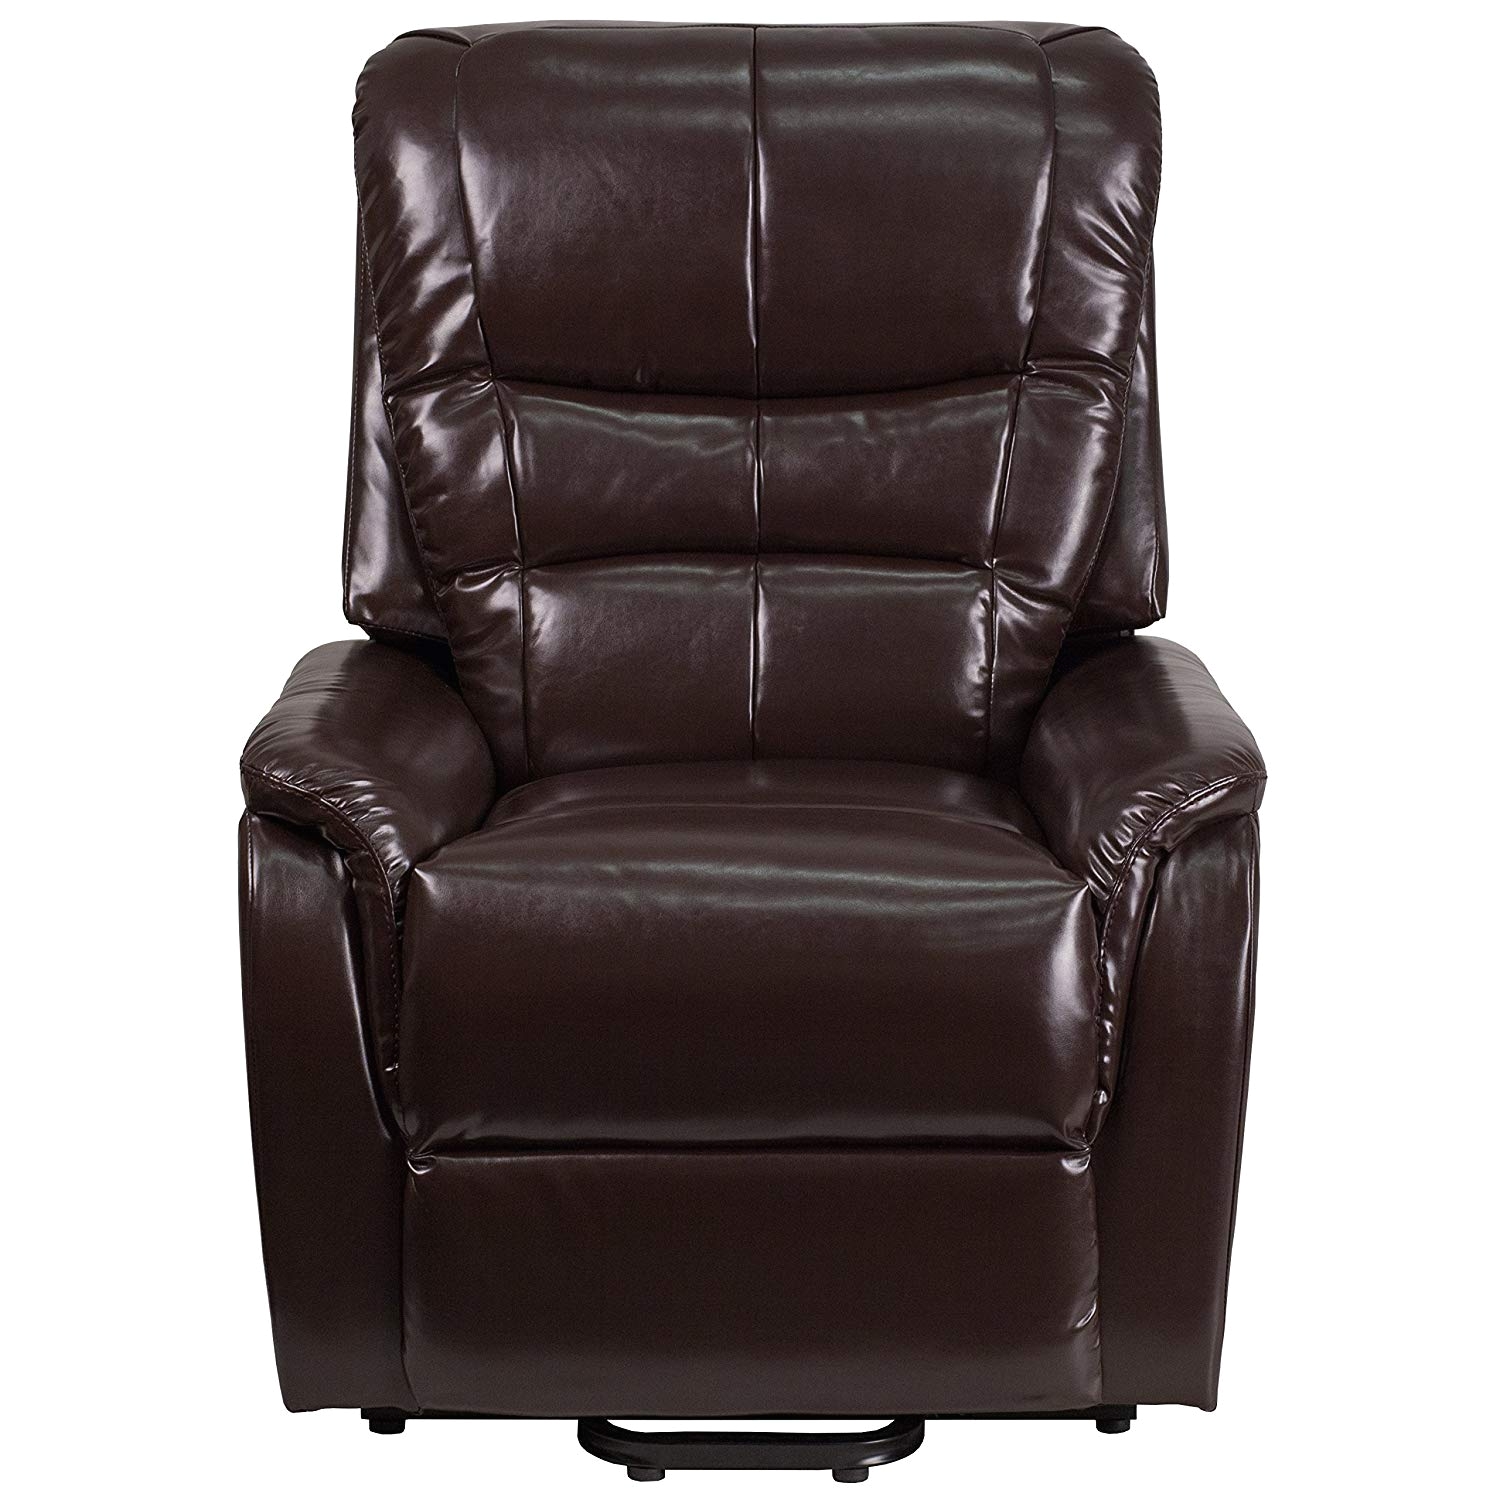 amazon com flash furniture hercules series brown leather remote powered lift recliner kitchen dining